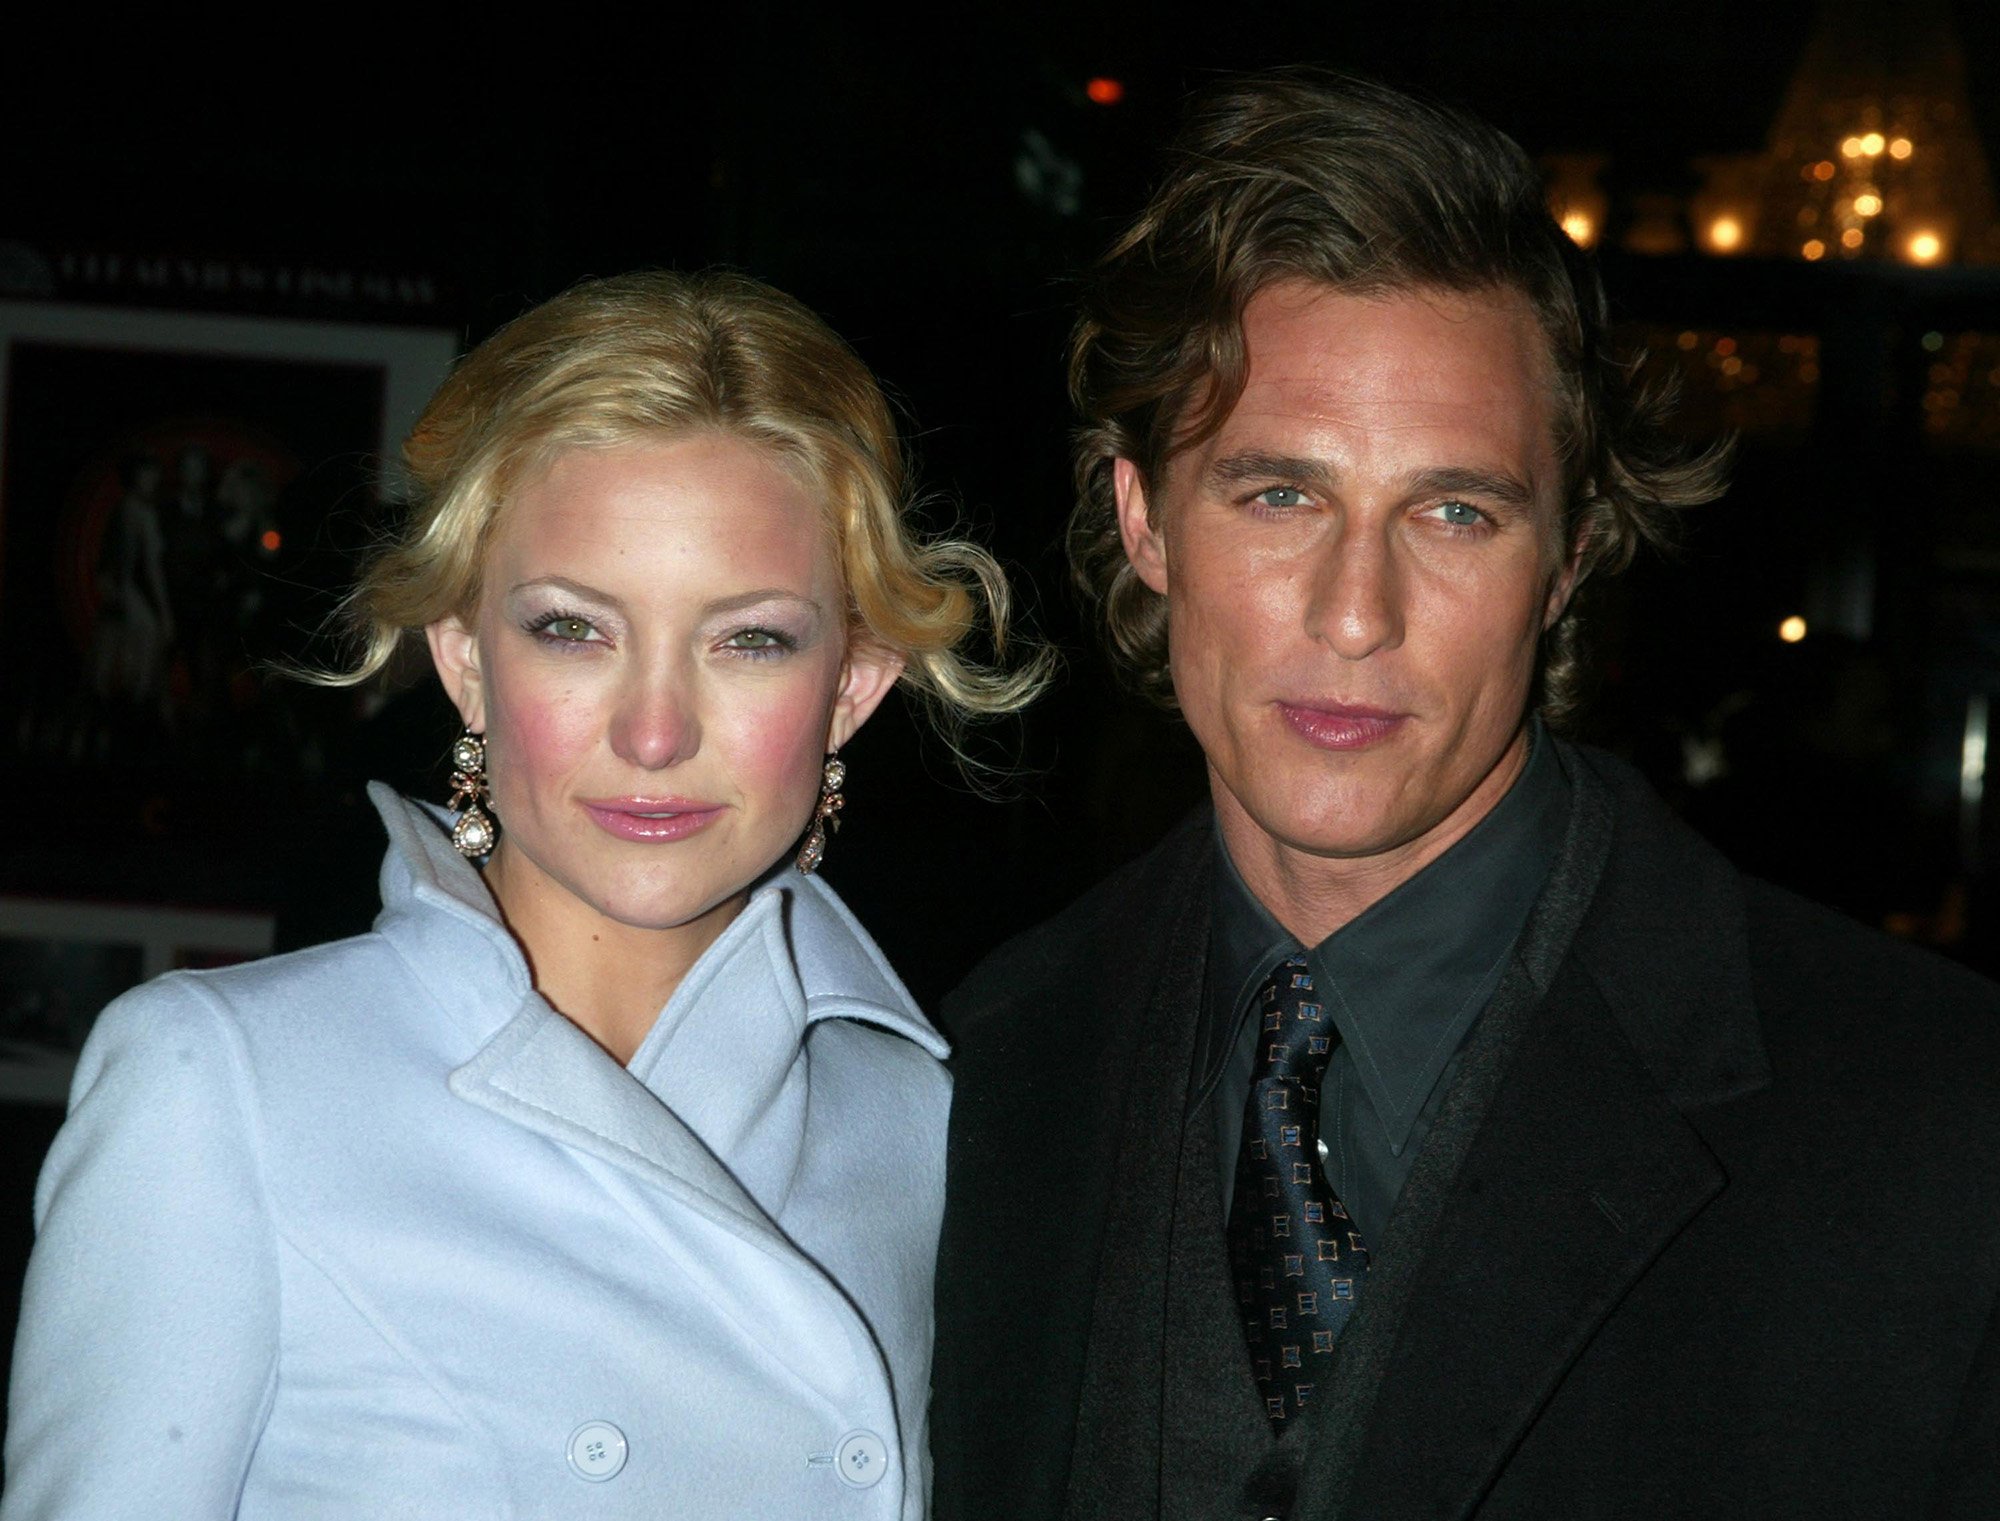 How to Lose a Guy in 10 Days stars Kate Hudson and Matthew McConaughey